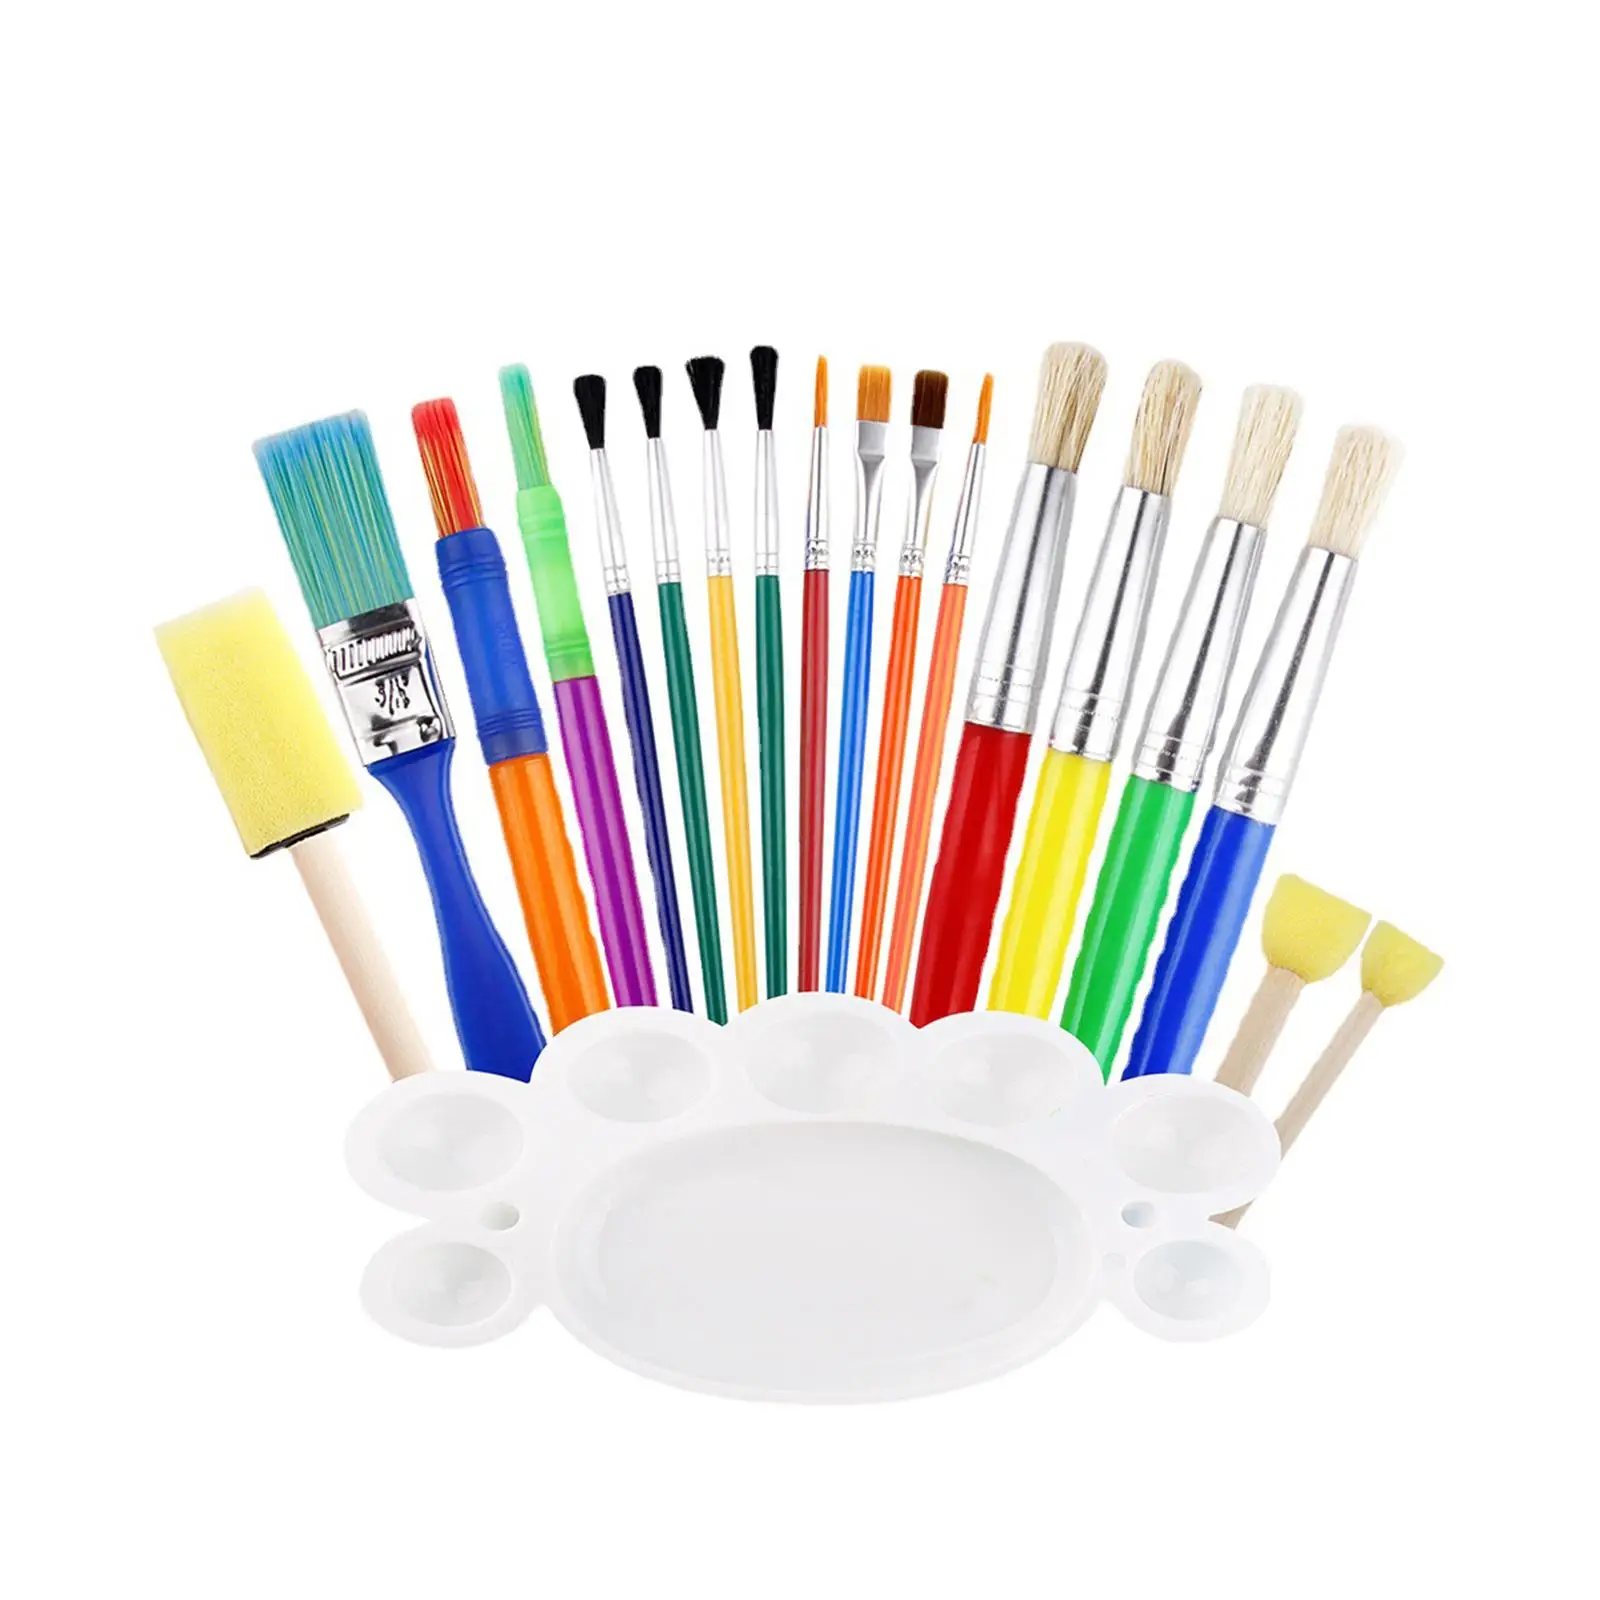 19x Paint Brush Set Watercolor Professional Durable Kids Adults Drawing Accessories Girls and Boys Beginner Paintbrush